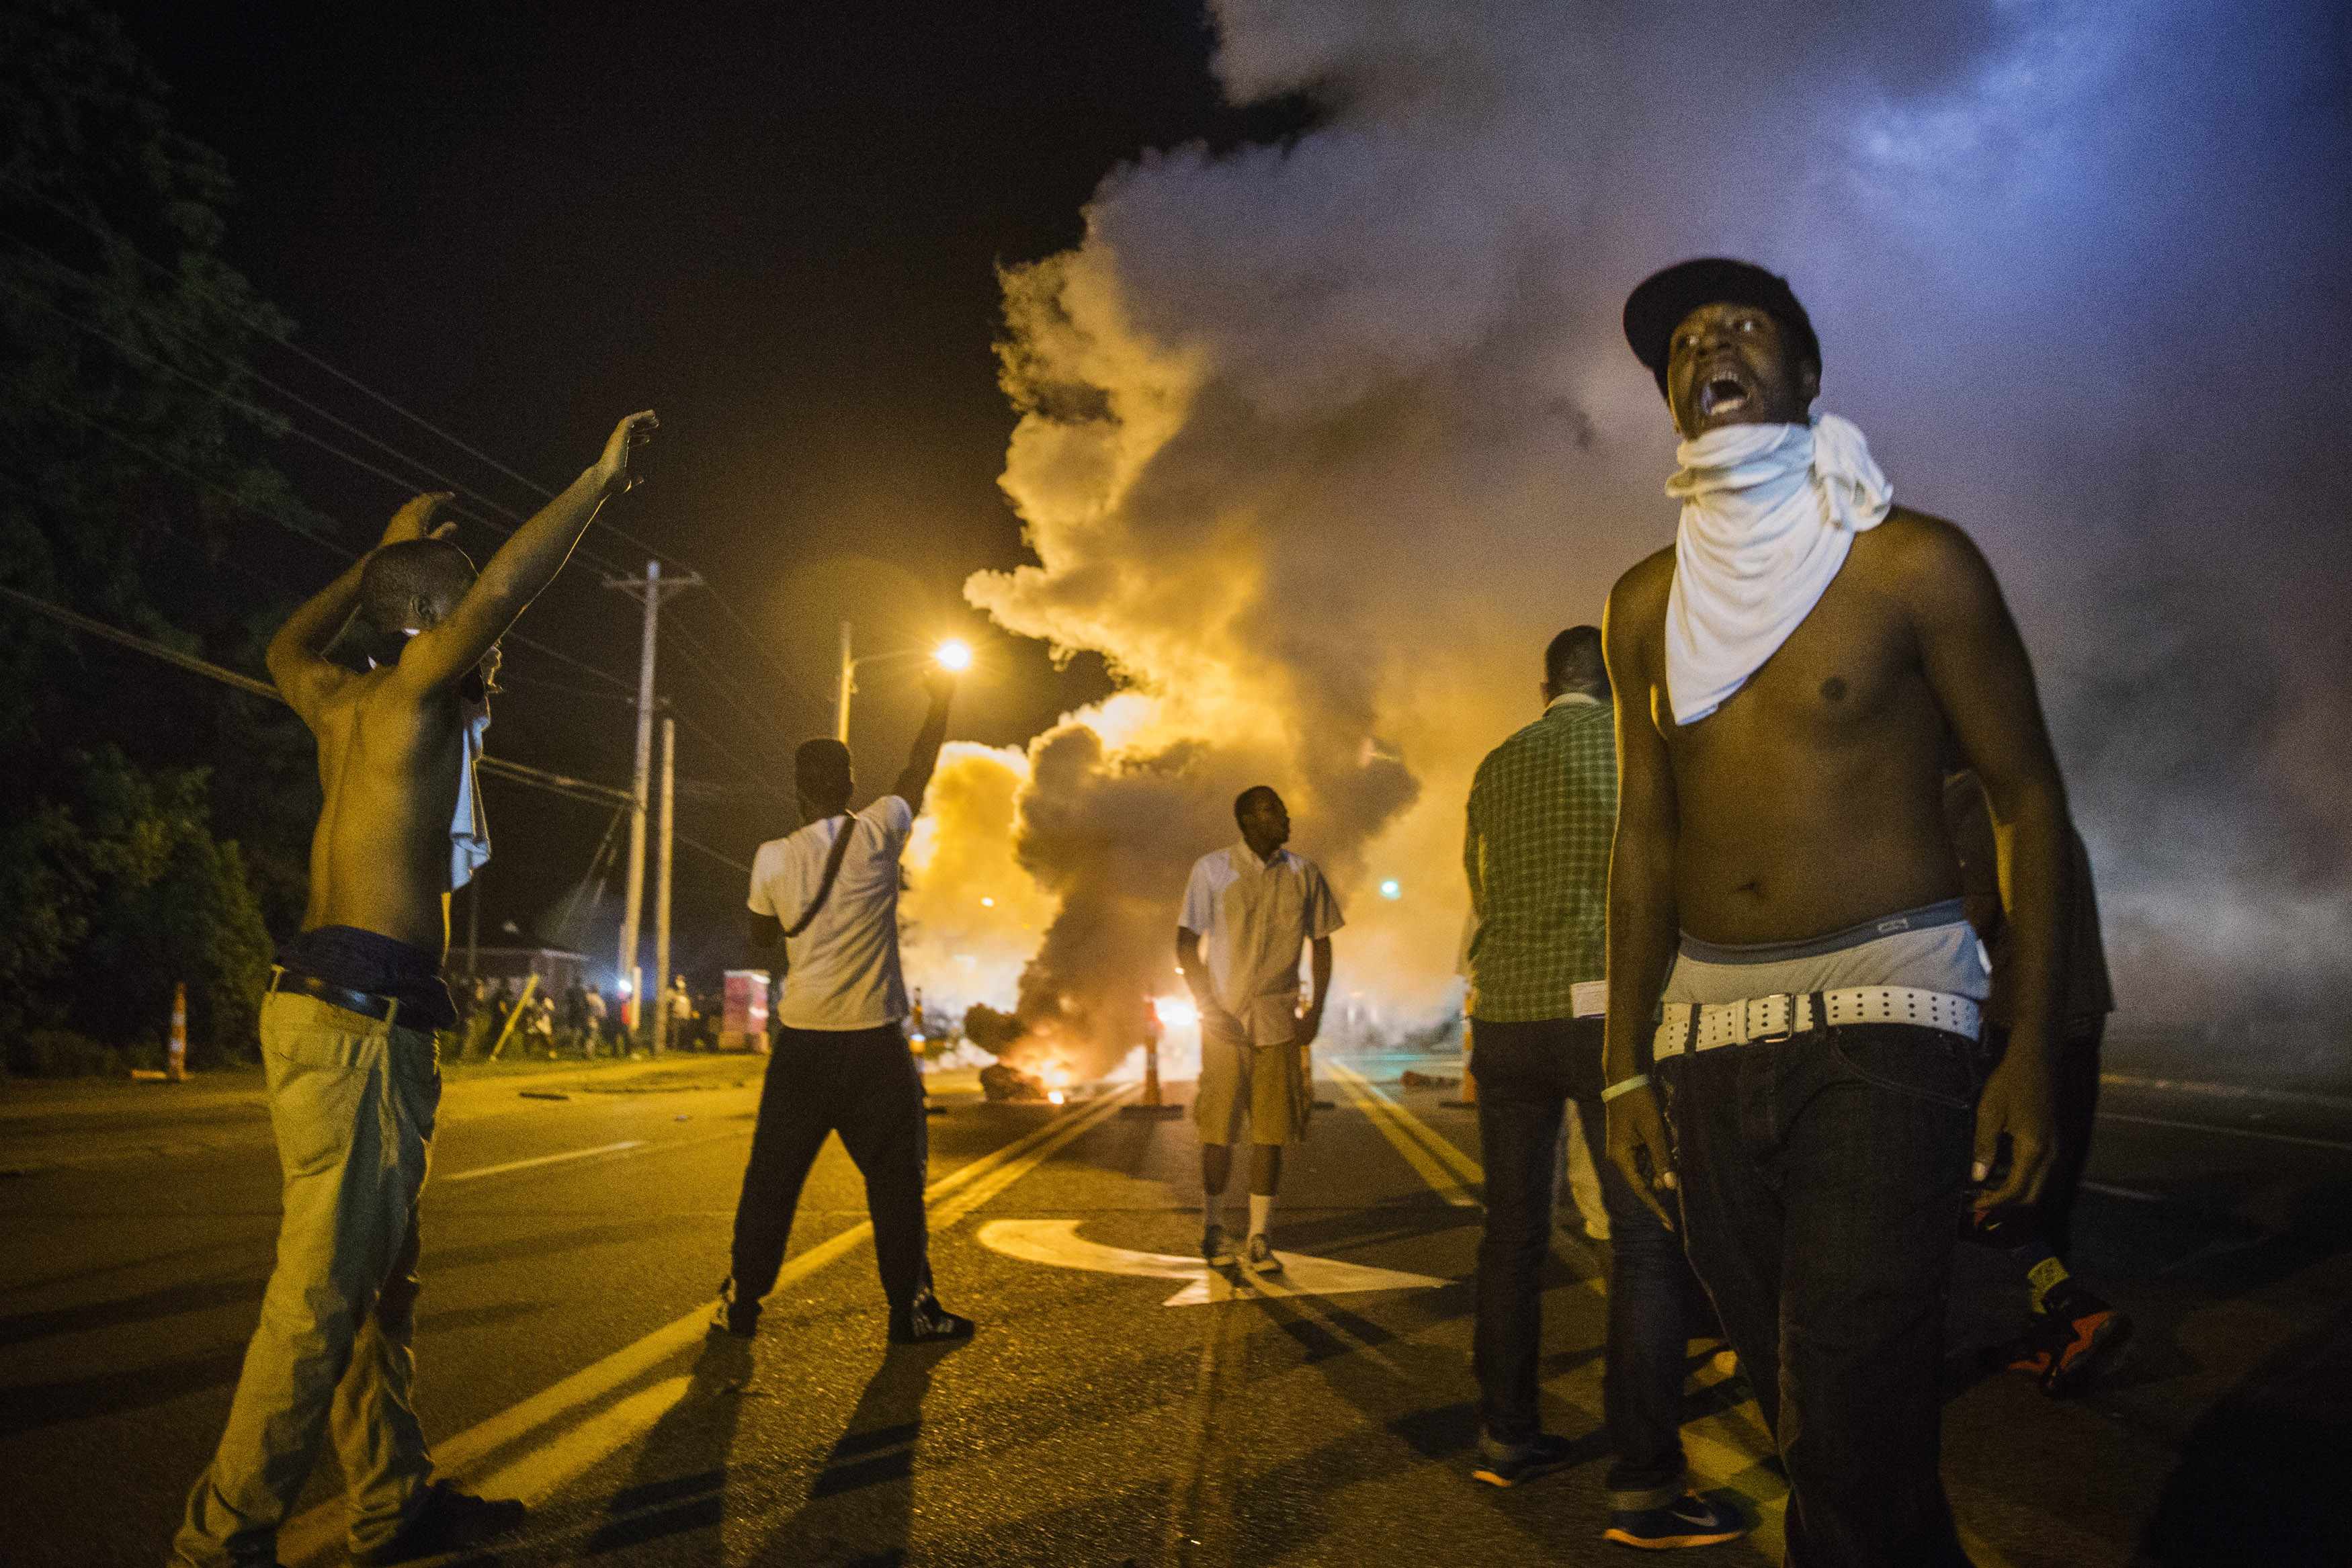 Demonstrators in Ferguson react to tear gas fired by police on Aug. 18 during protests over the fatal shooting of teenager Michael Brown. (REUTERS/Lucas Jackson) 